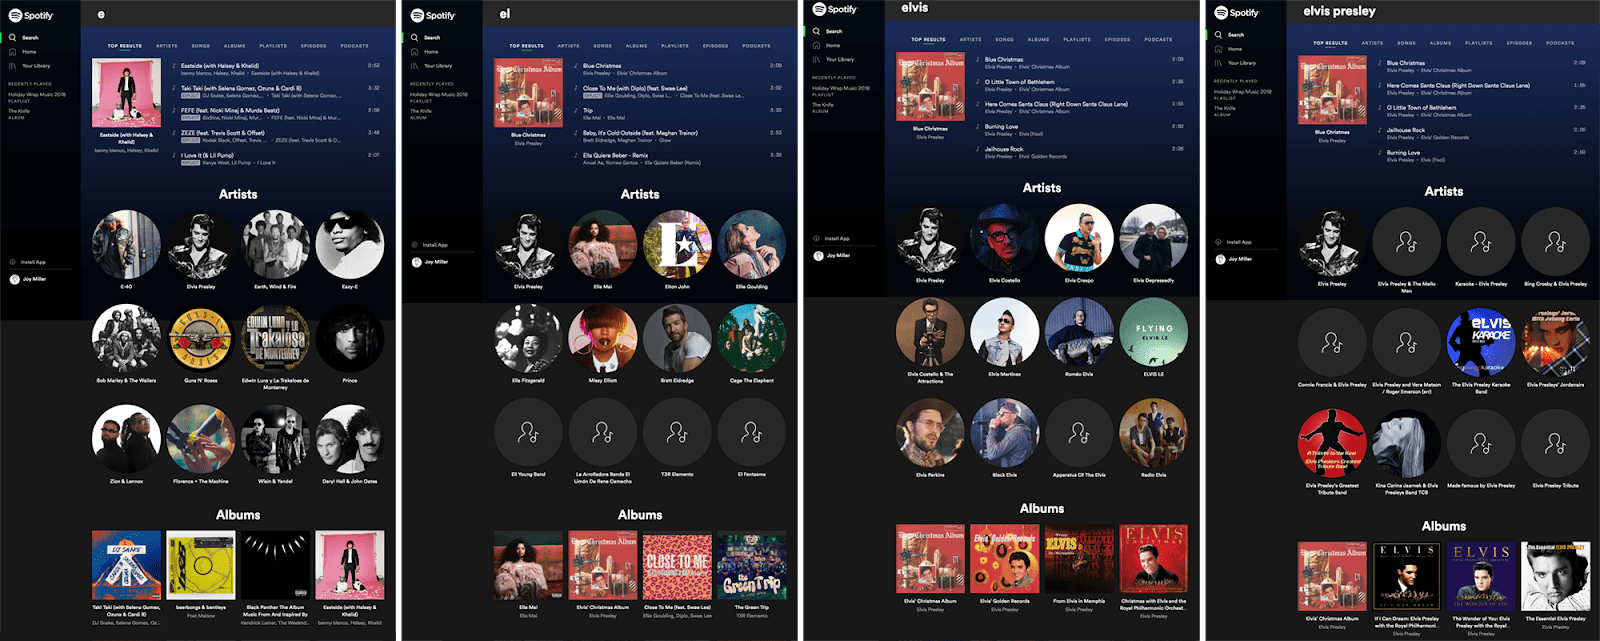 Spotify uses predictive search to help users find what they're looking for quickly